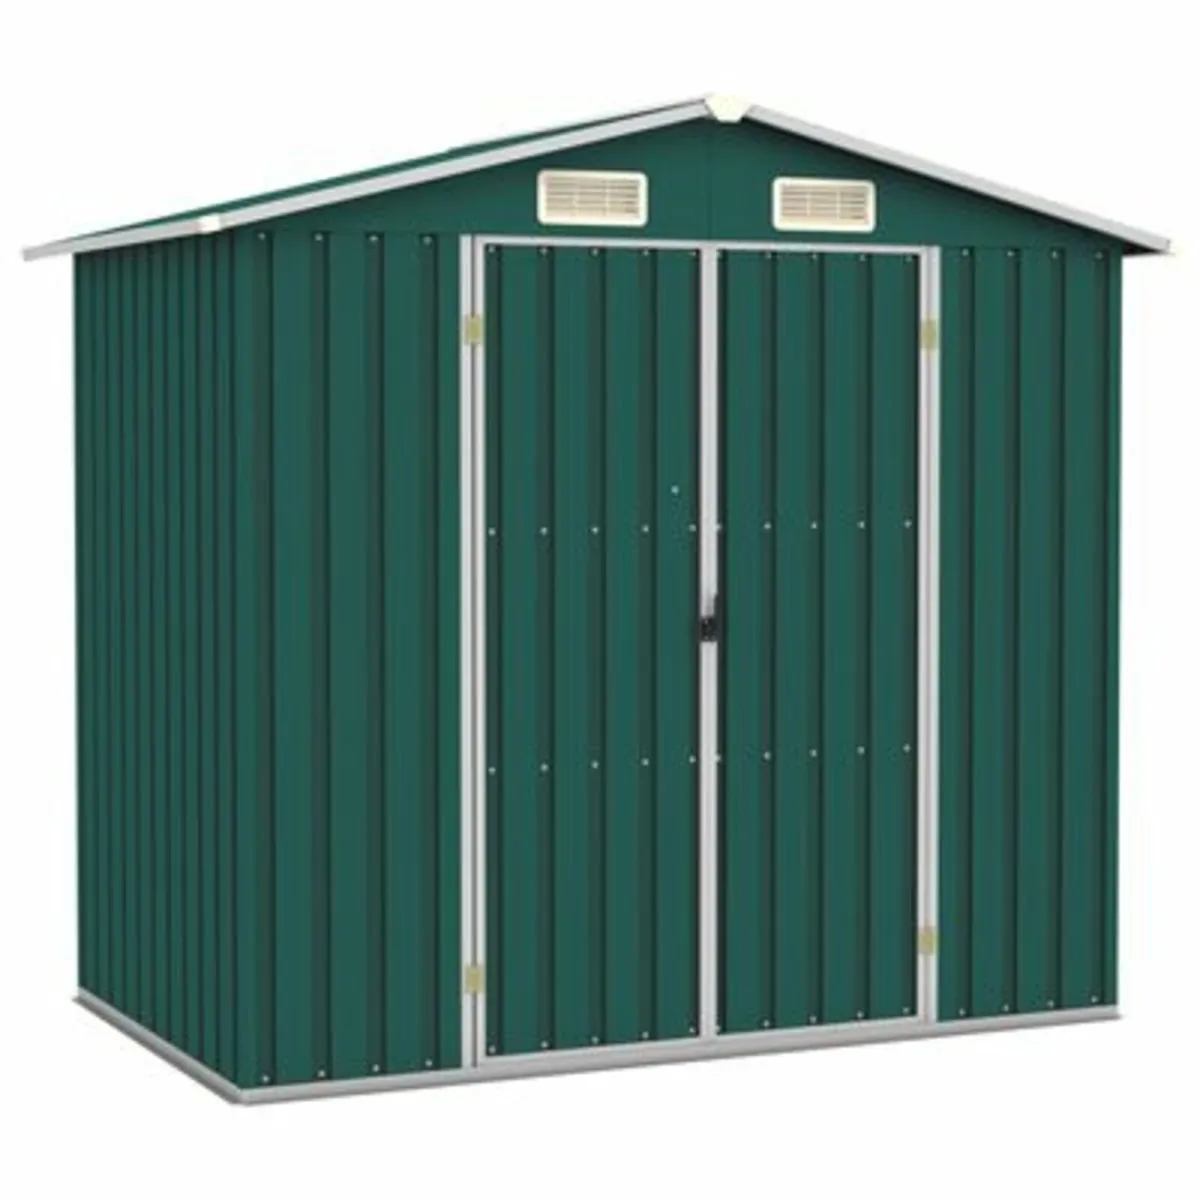 Shed Green 205x129x183 cm Galvanised Steel